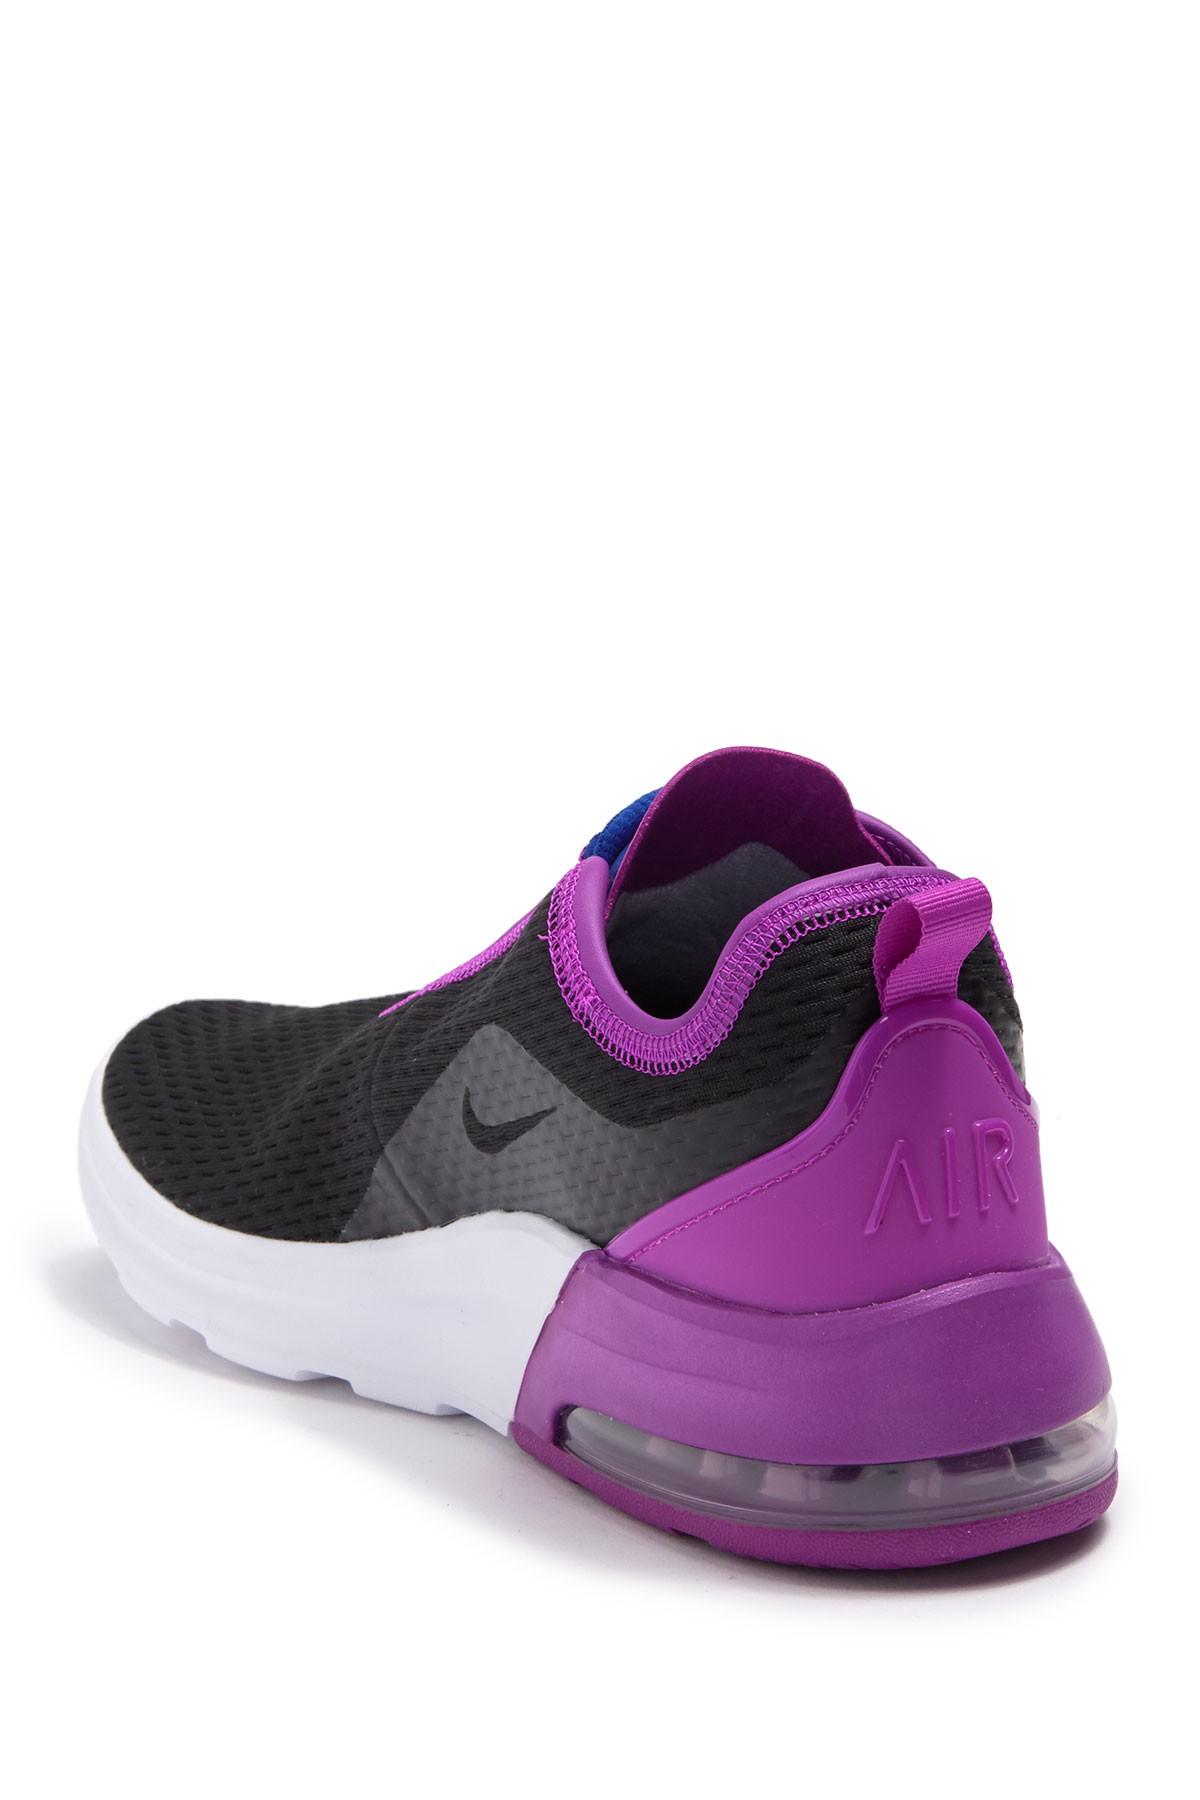 Nike Rubber Air Max Motion 2 Sneakers in Purple - Lyst